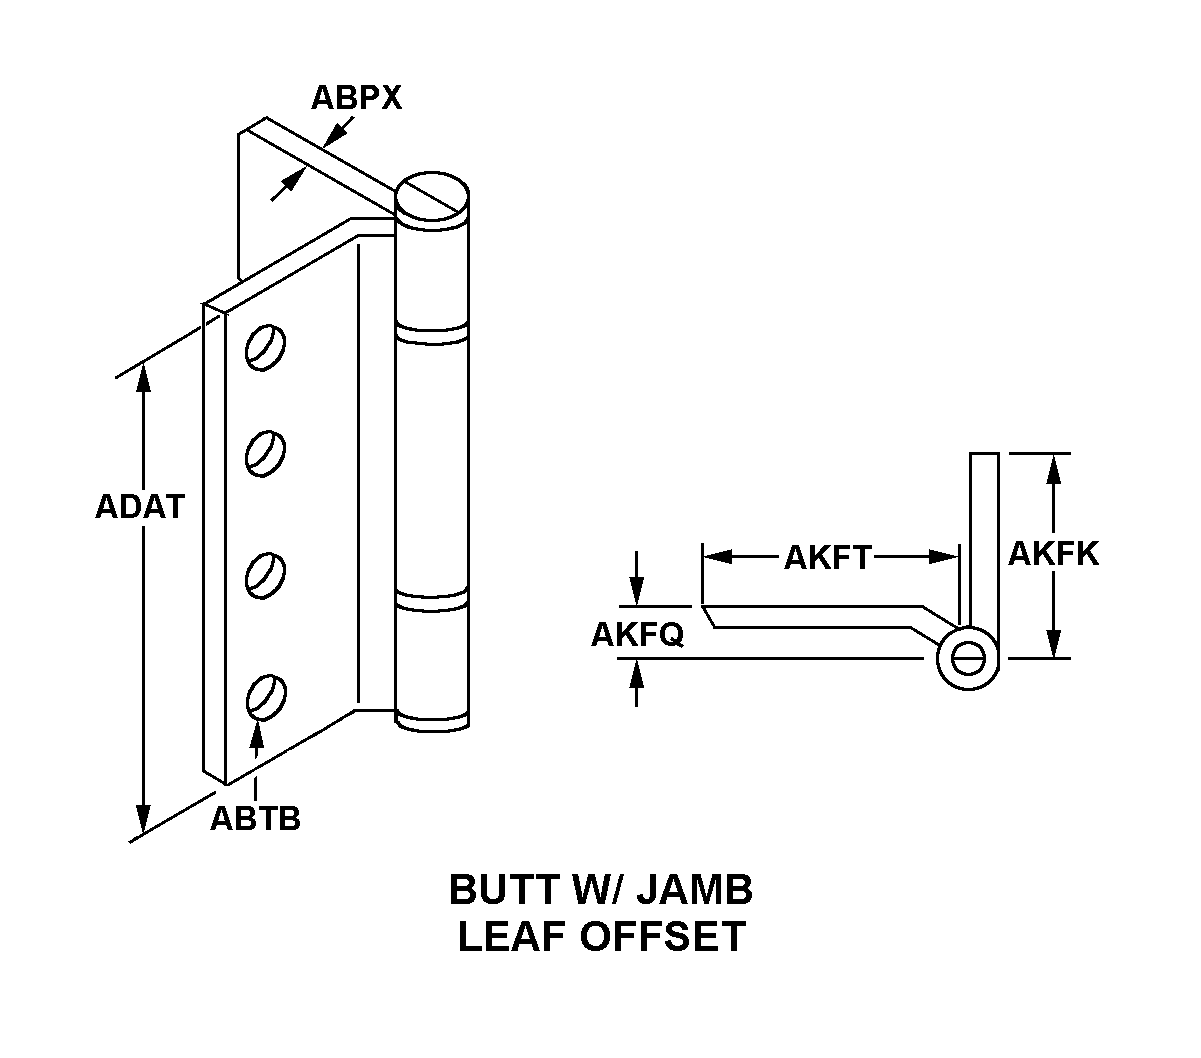 BUTT W/JAMB LEAF OFFSET style nsn 5340-01-413-6851